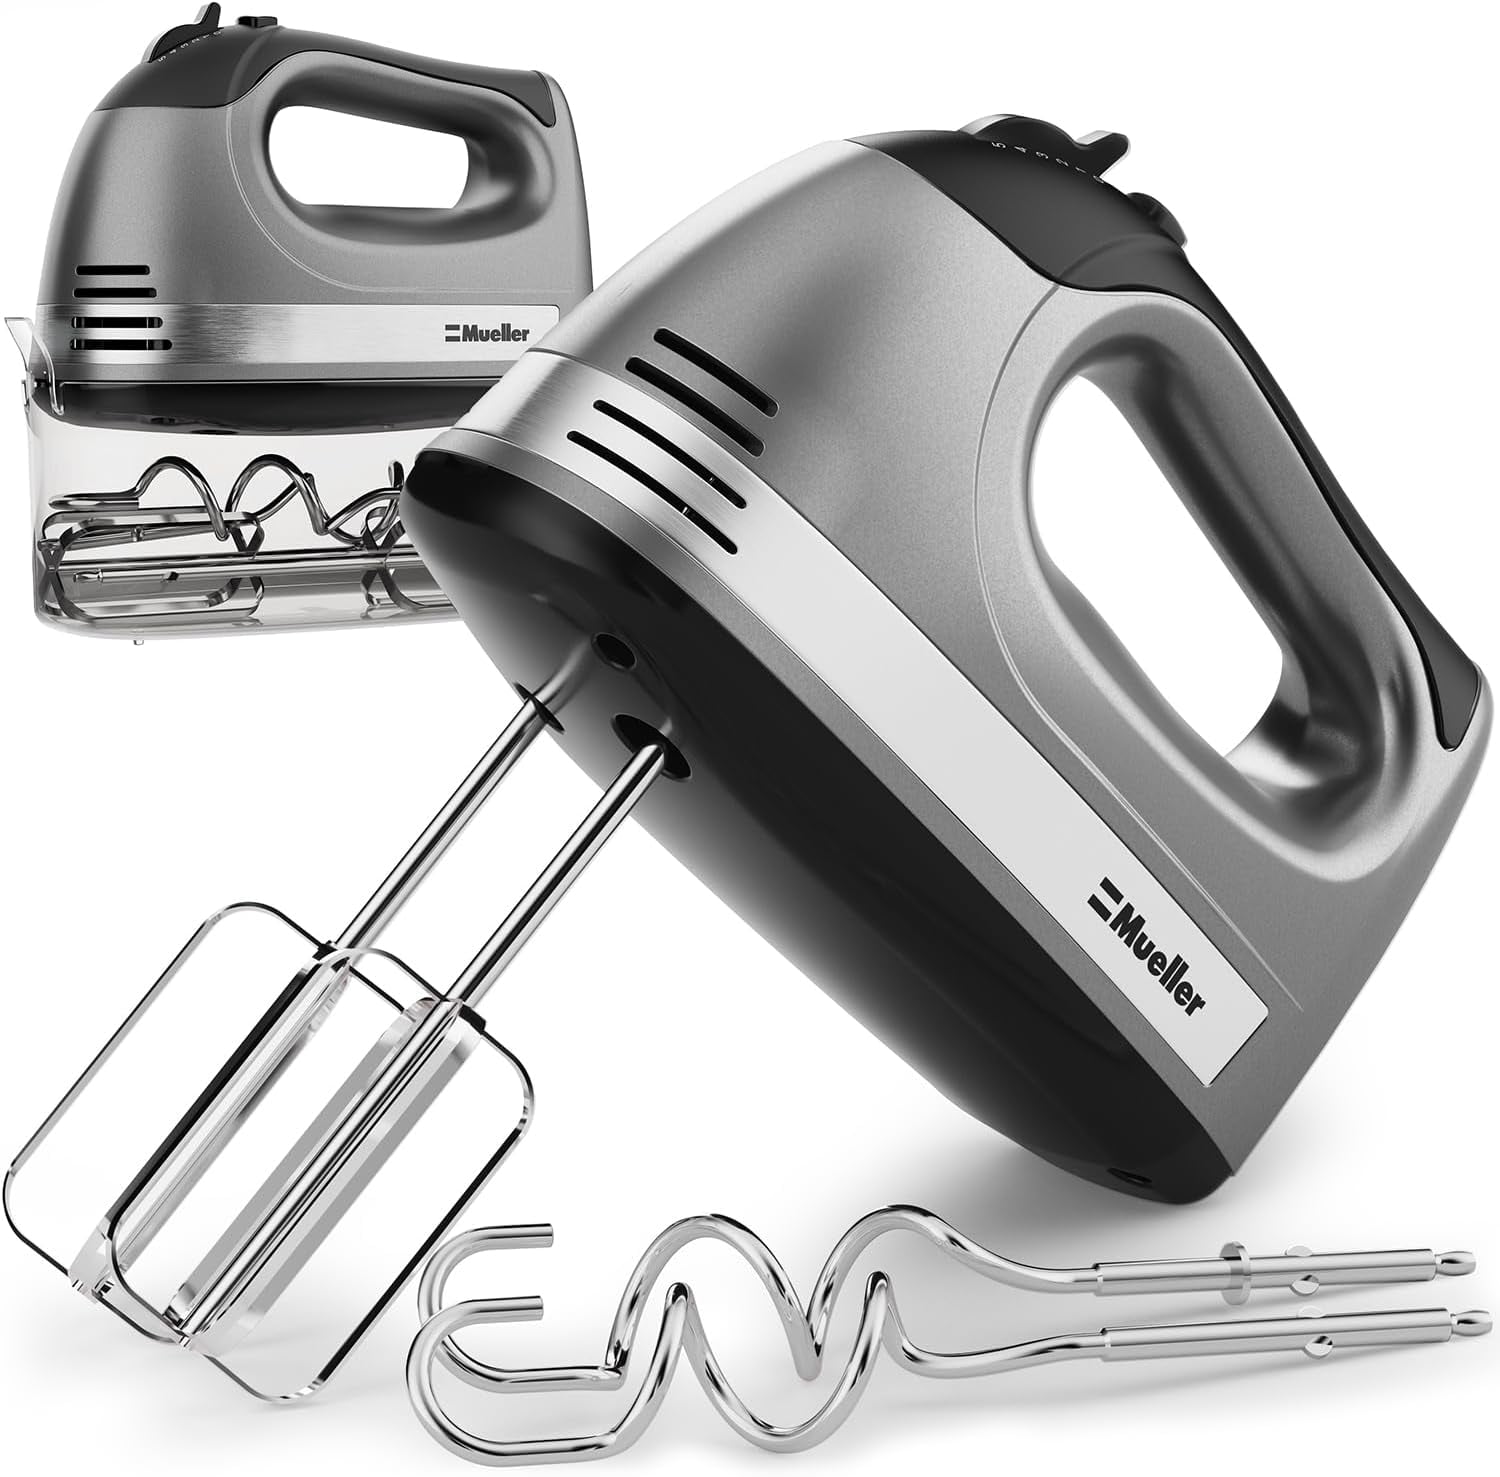 Moss & Stone Hand Mixer With Snap-On Storage Case, 5 Speed